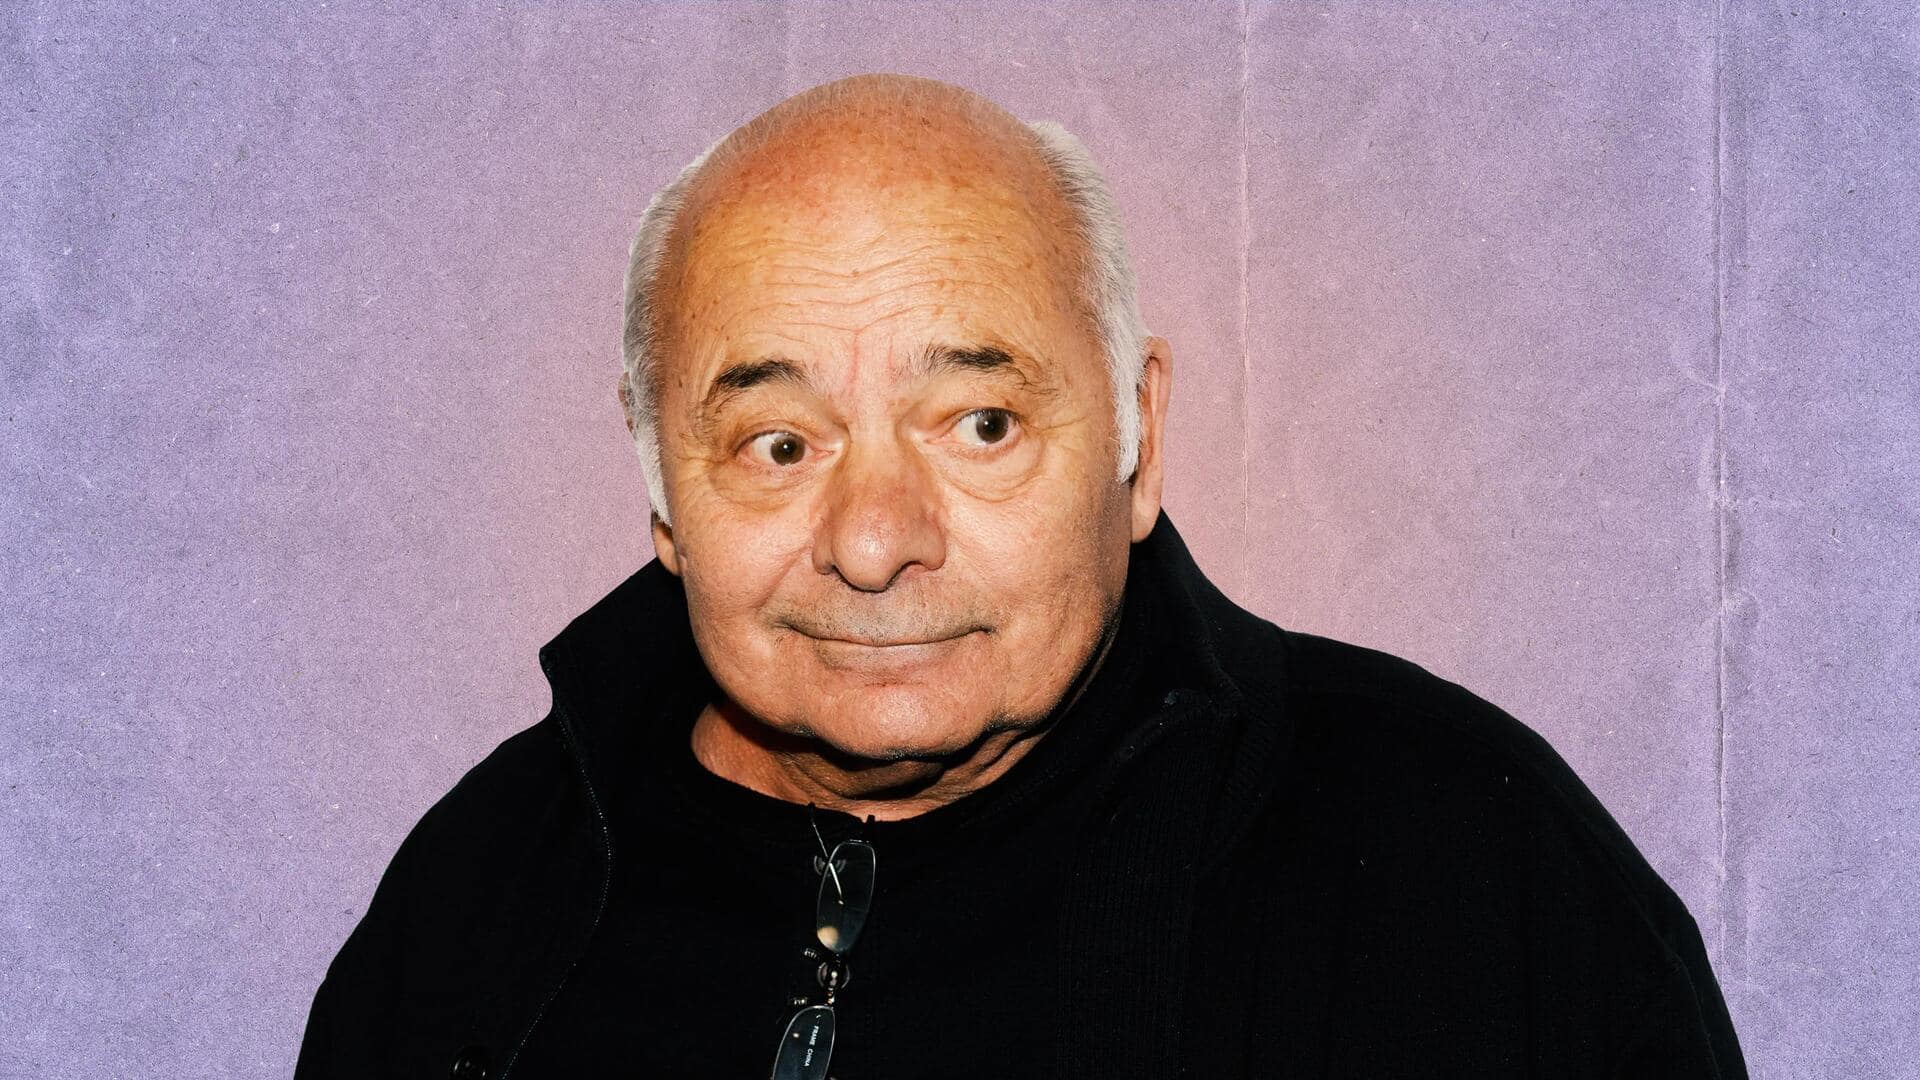 Oscar nominee Burt Young dies (83); Sylvester Stallone pays tribute